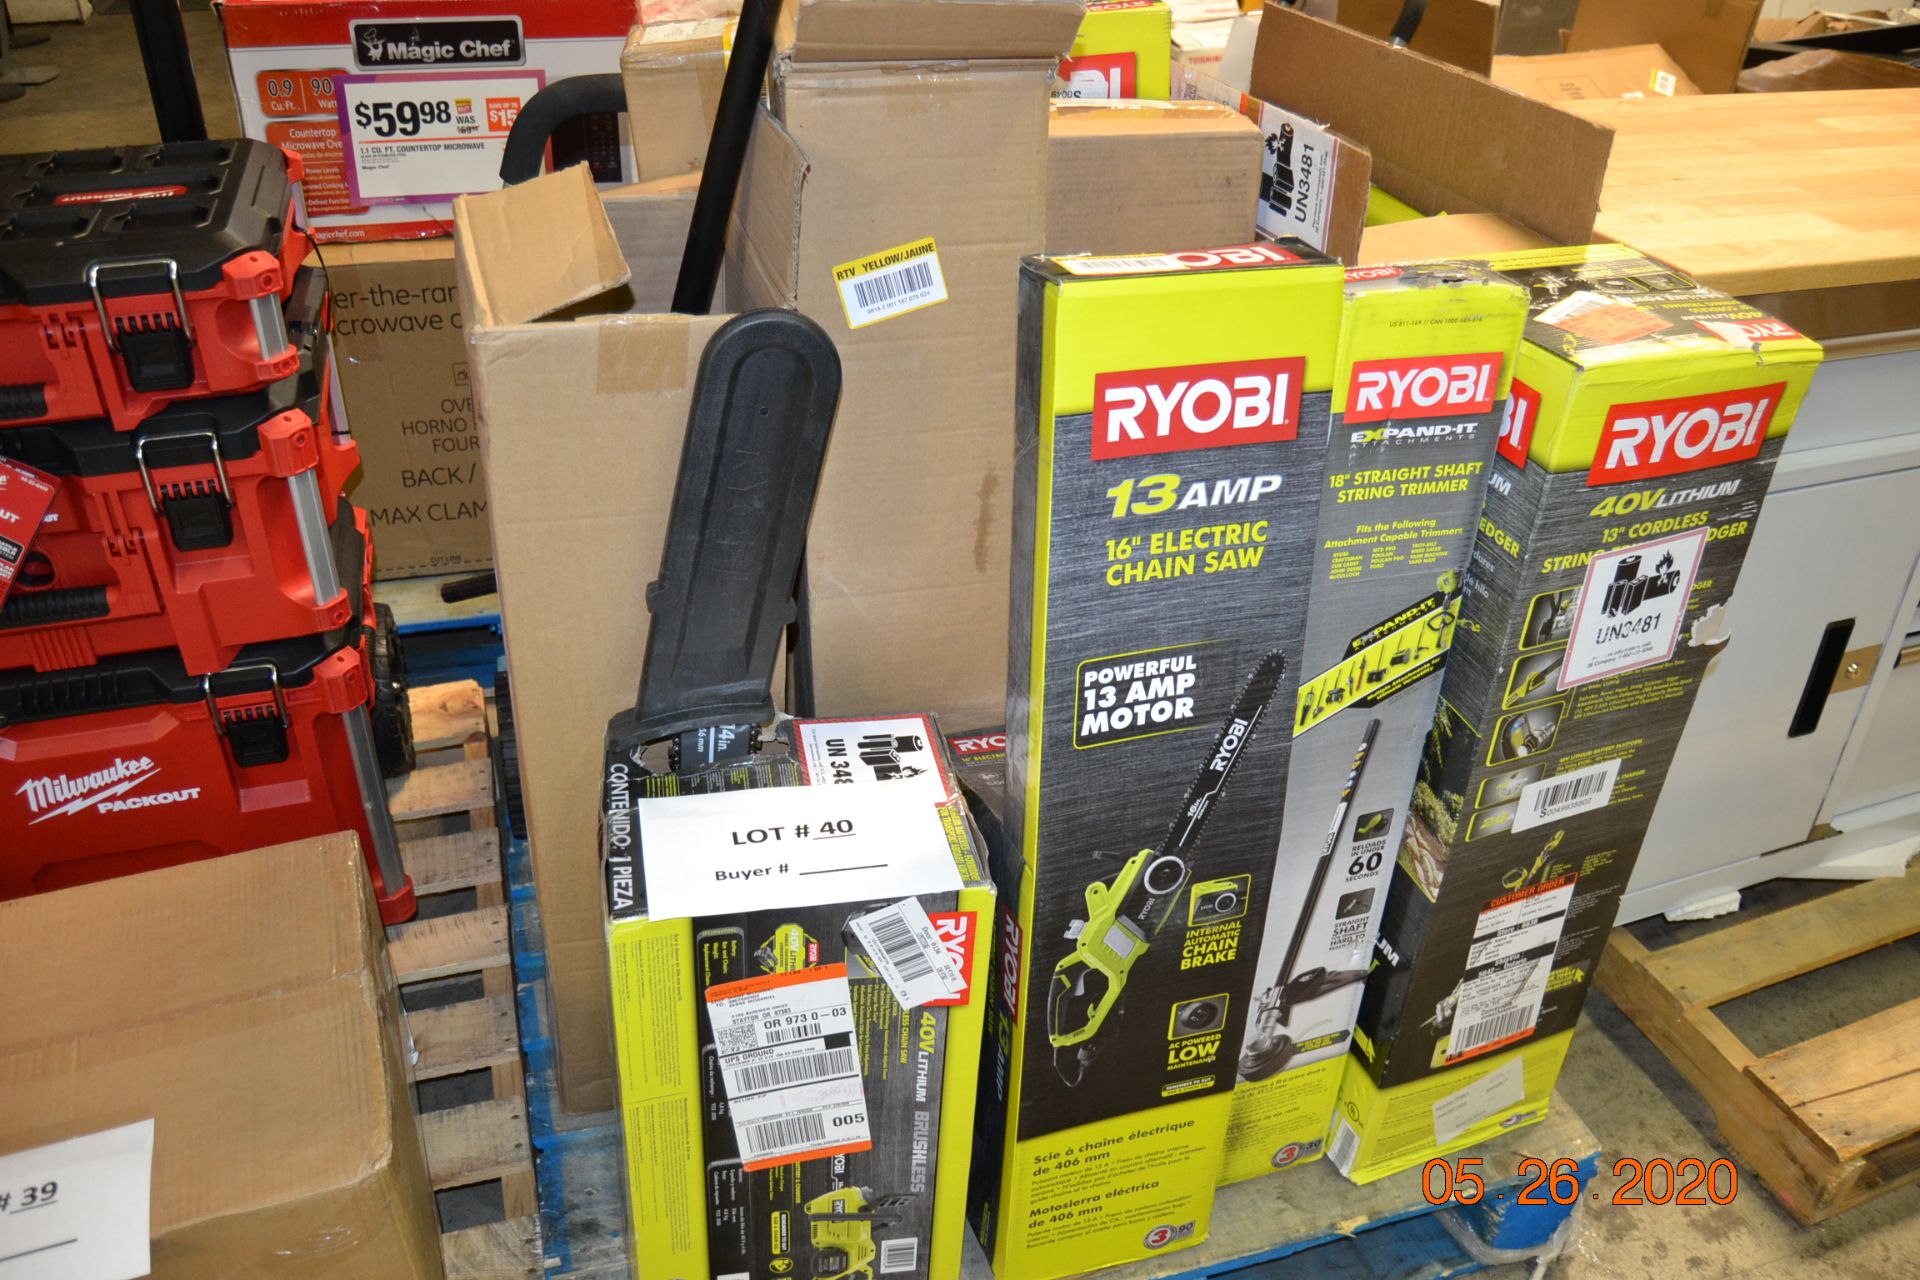 ASSORTED RYOBI GAS POWER TOOLS, BLOWER, PRESSURE WASHER, TRIMMERS++(15PCS)